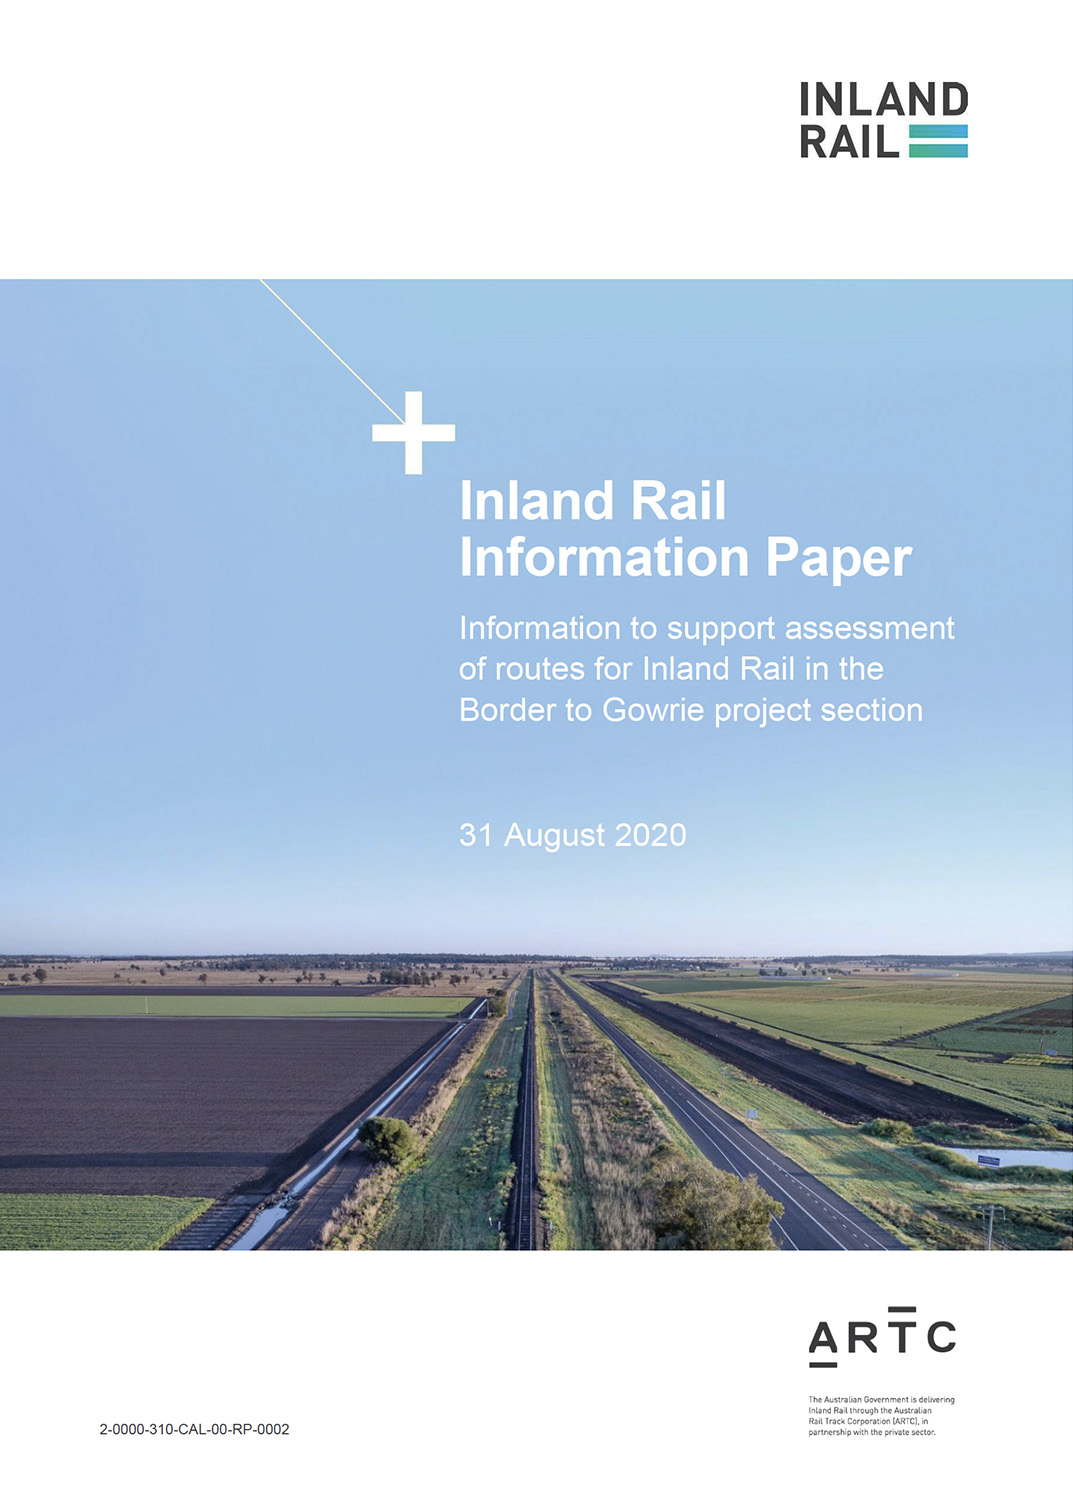 Thumbnail image of the cover page of the Information to support assessment of routes for Inland Rail in the Border to Gowrie project section document